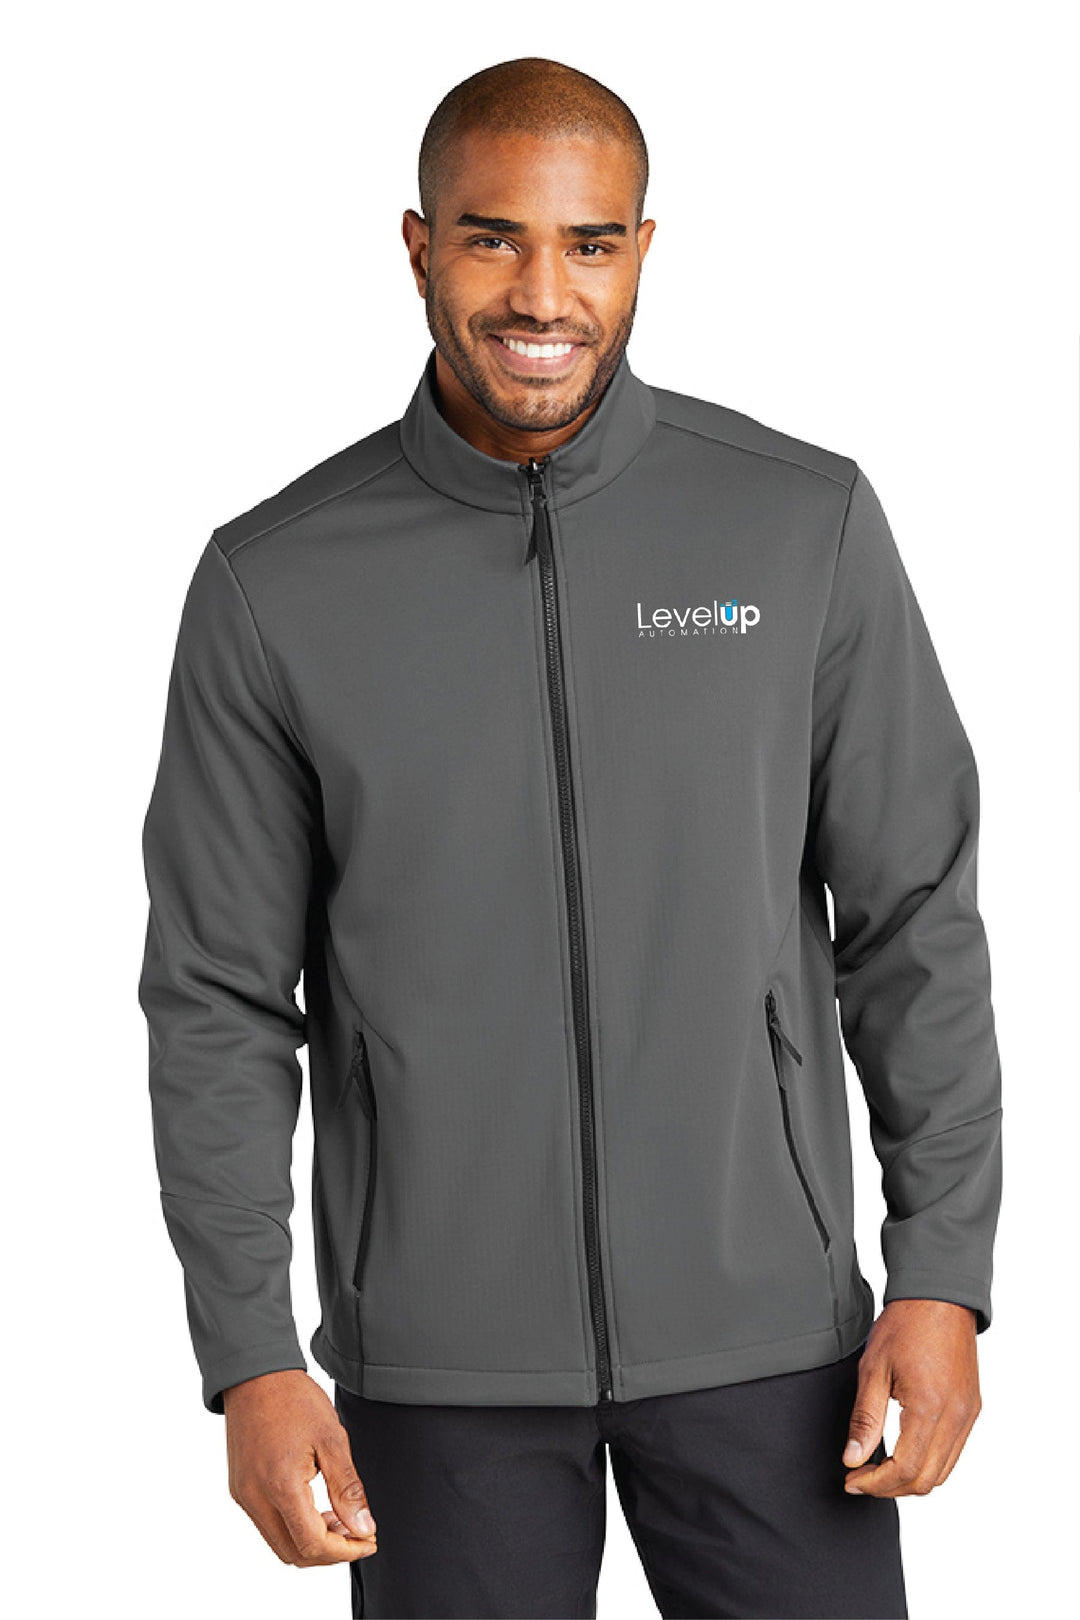 Level Up Automation Apparel & Accessories Men's Jacket - Grey